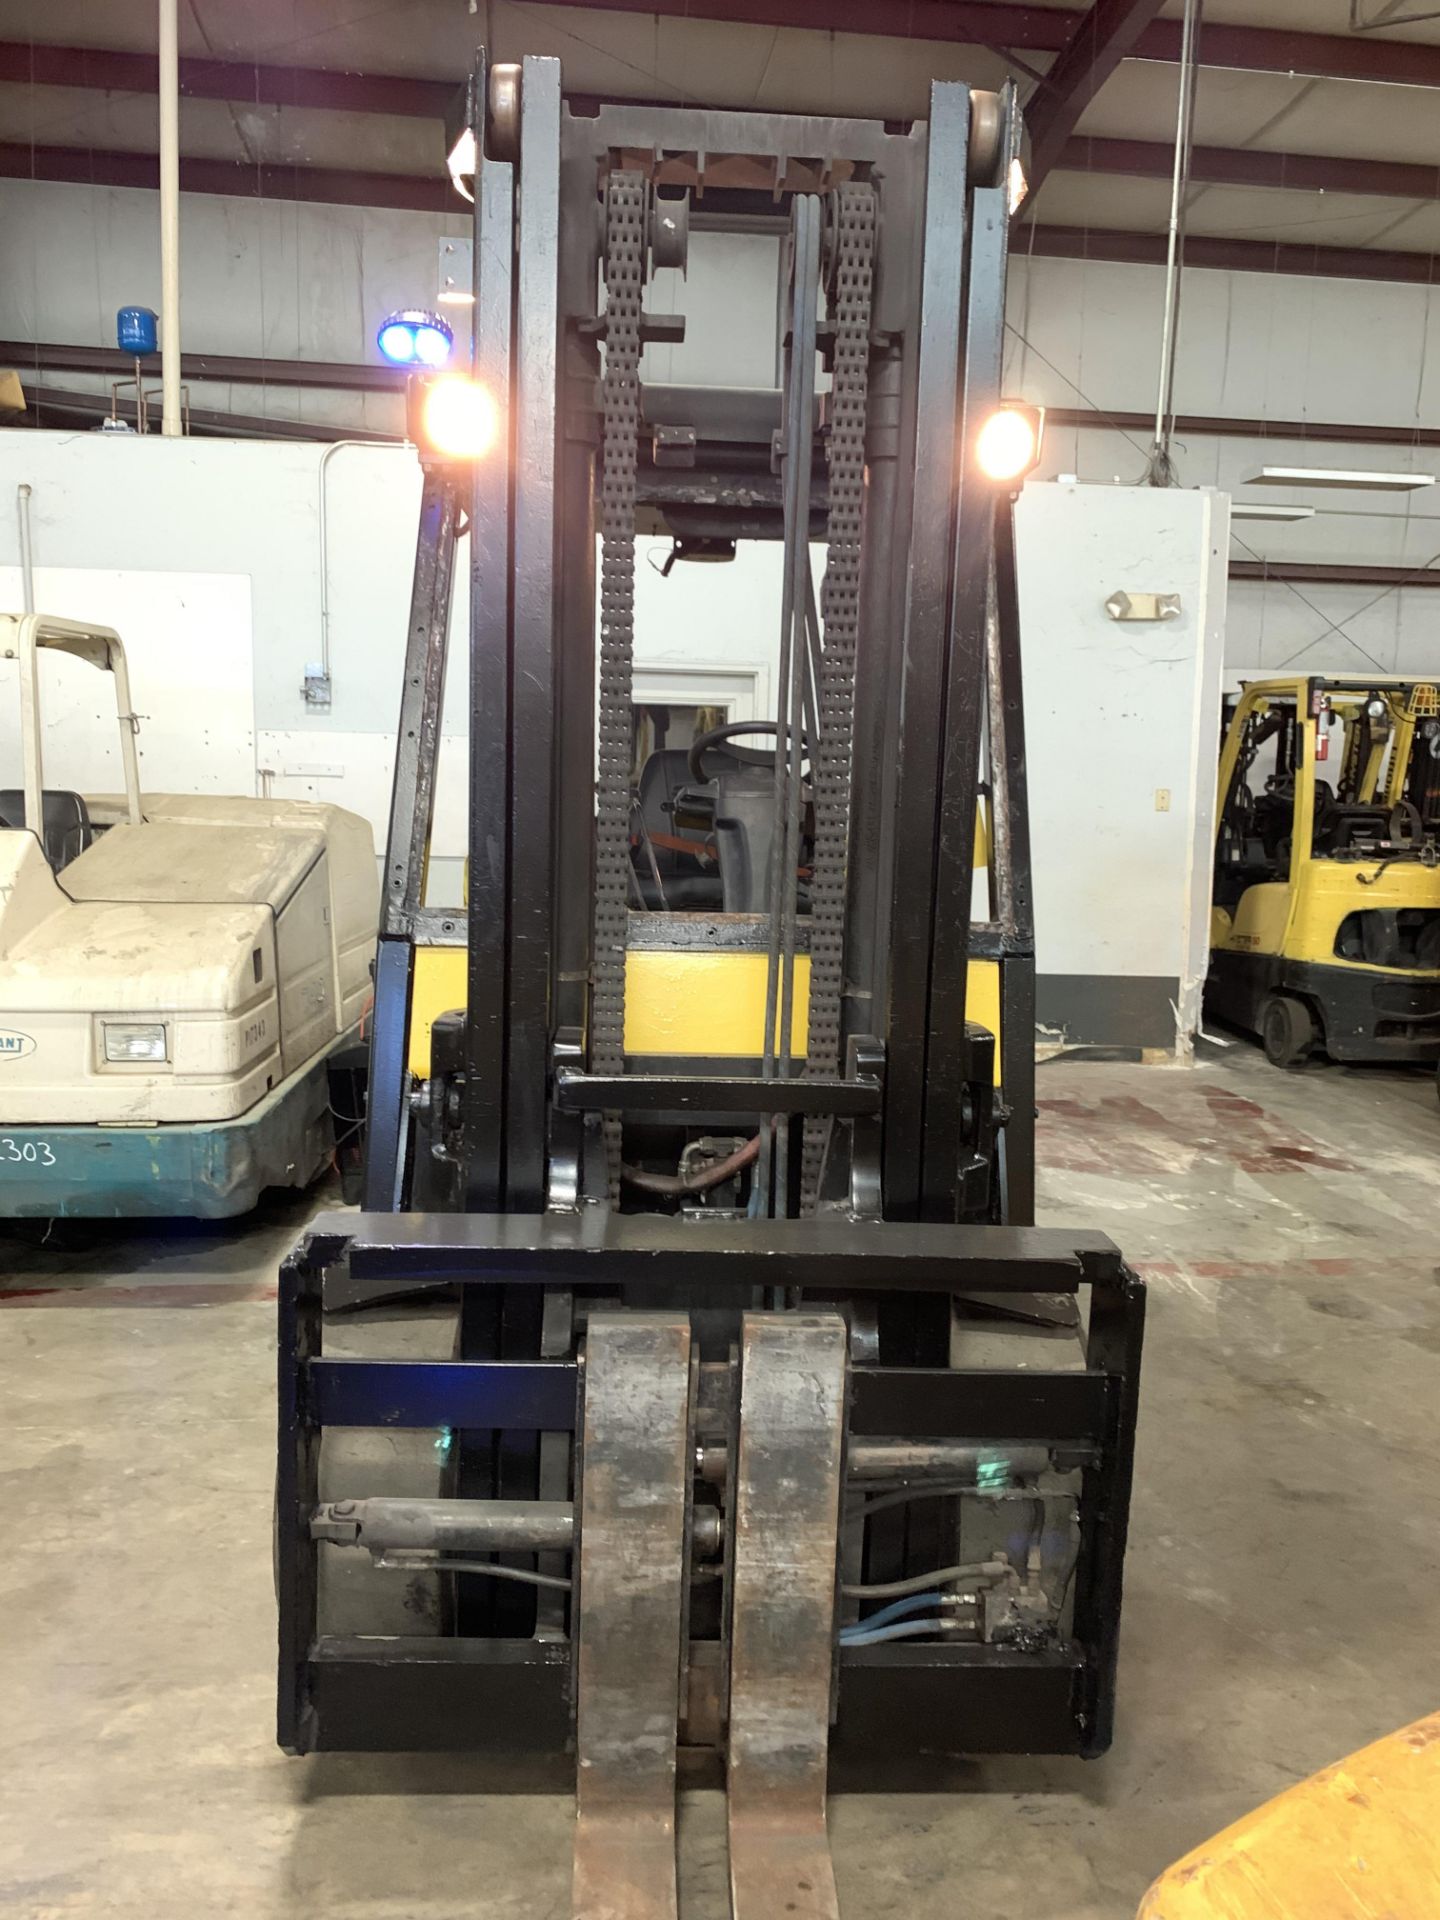 2013 HYSTER 15,500 LB. DIESEL FORKLIFT MODEL S155FT; SOLID TIRES; 2-STAGE MAST, 7811 HR (LOCATED OH) - Image 4 of 5